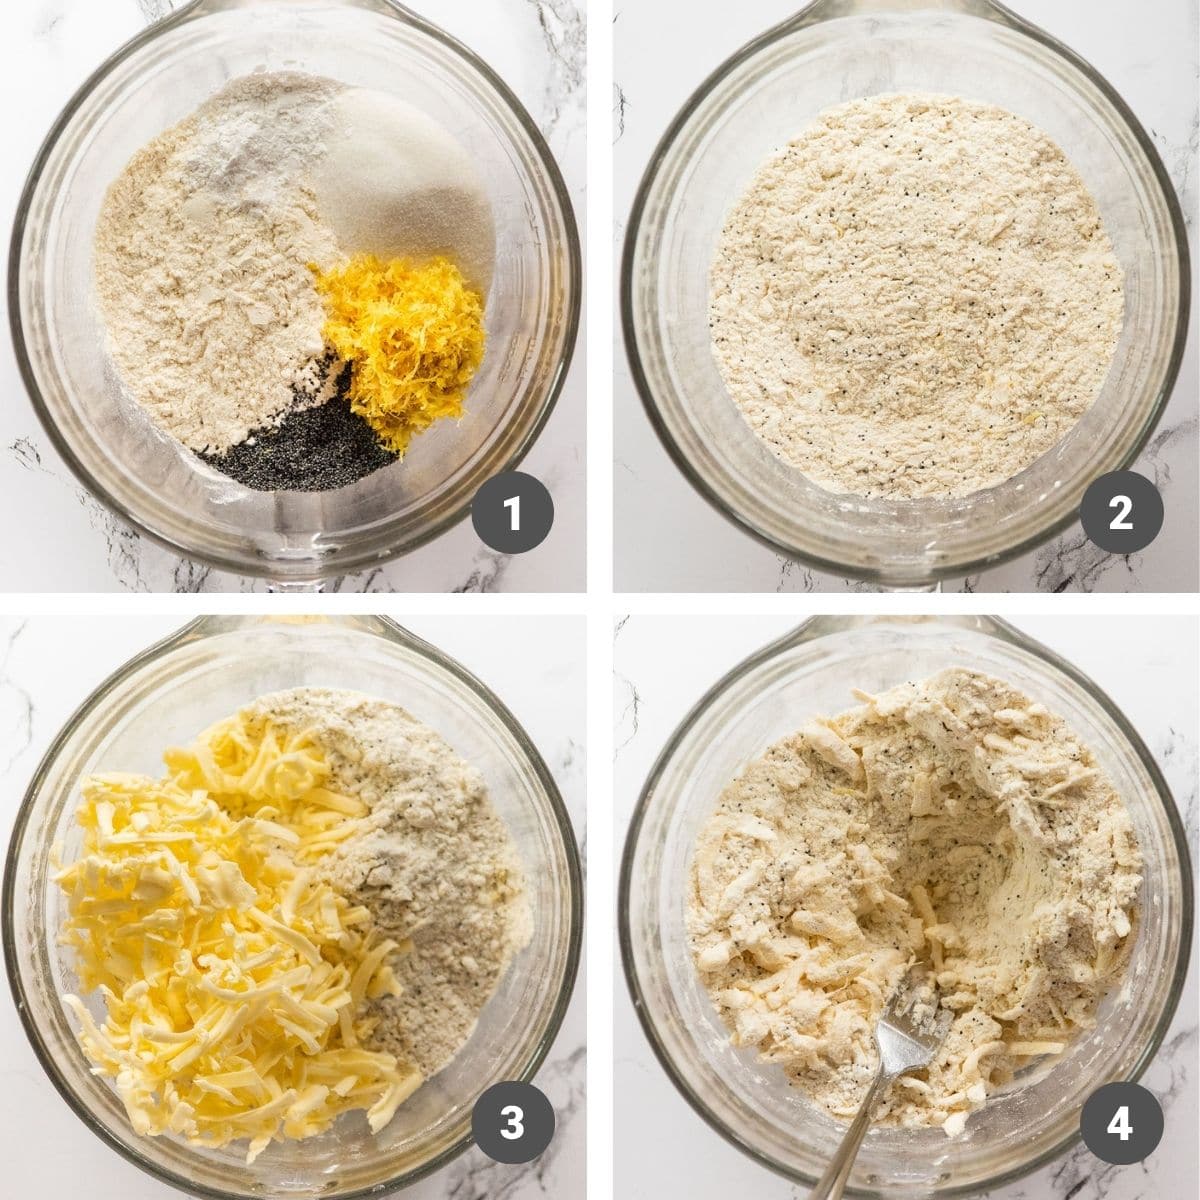 Mixing dry ingredients together in a large glass mixing bowl.